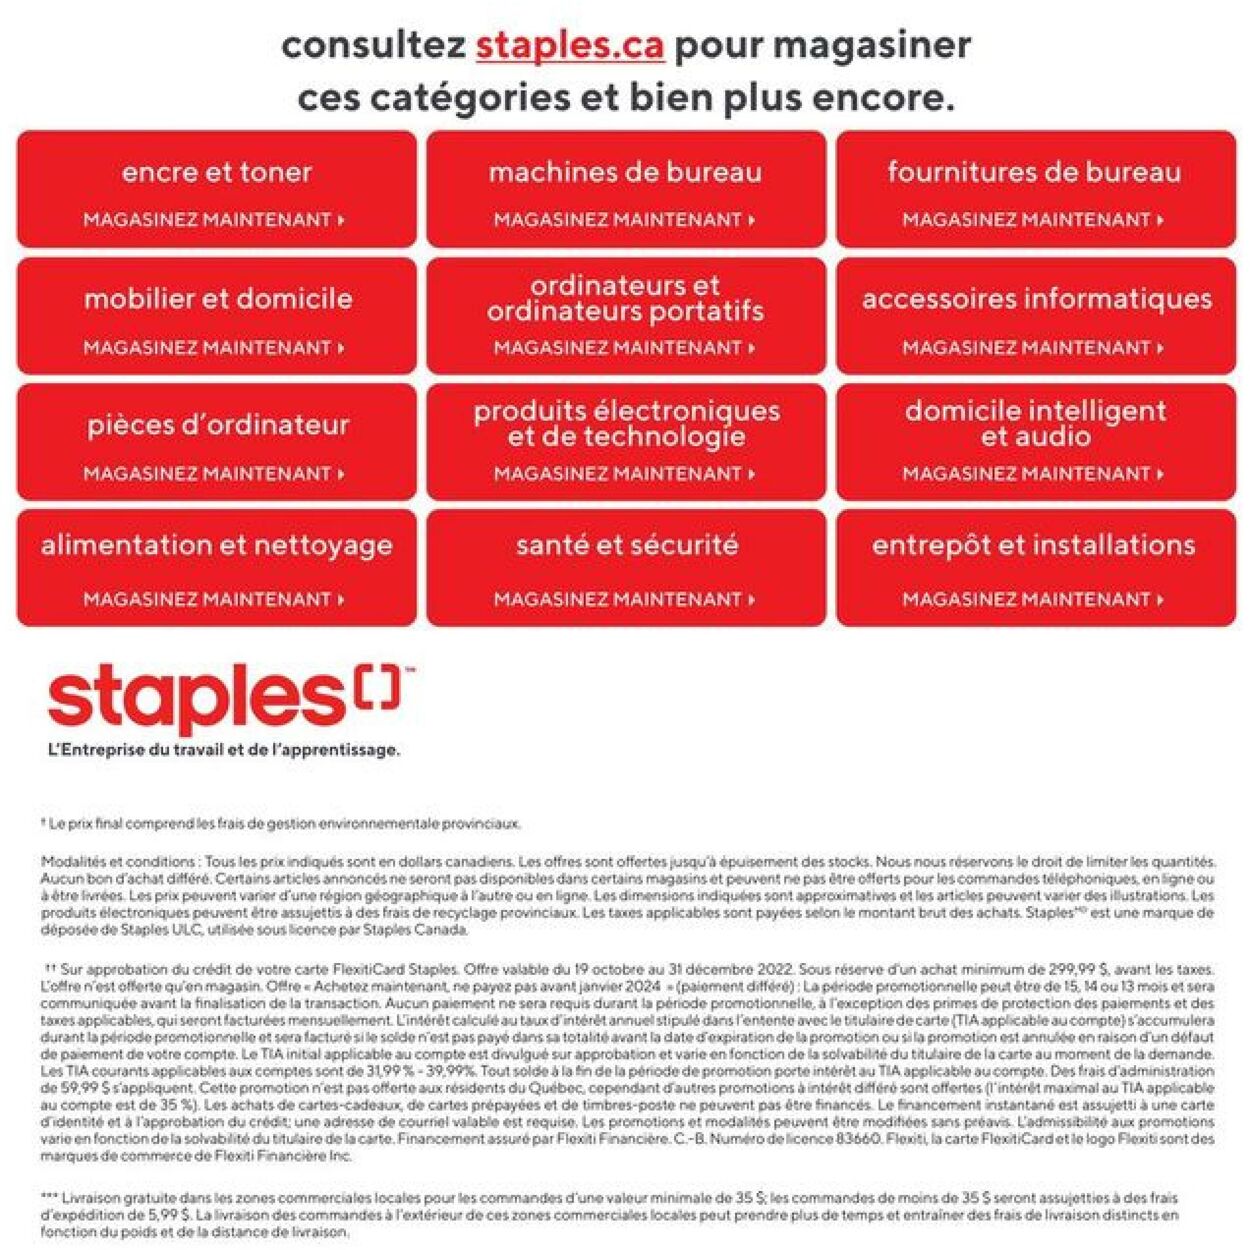 Circulaire Staples 16.11.2022 - 24.11.2022